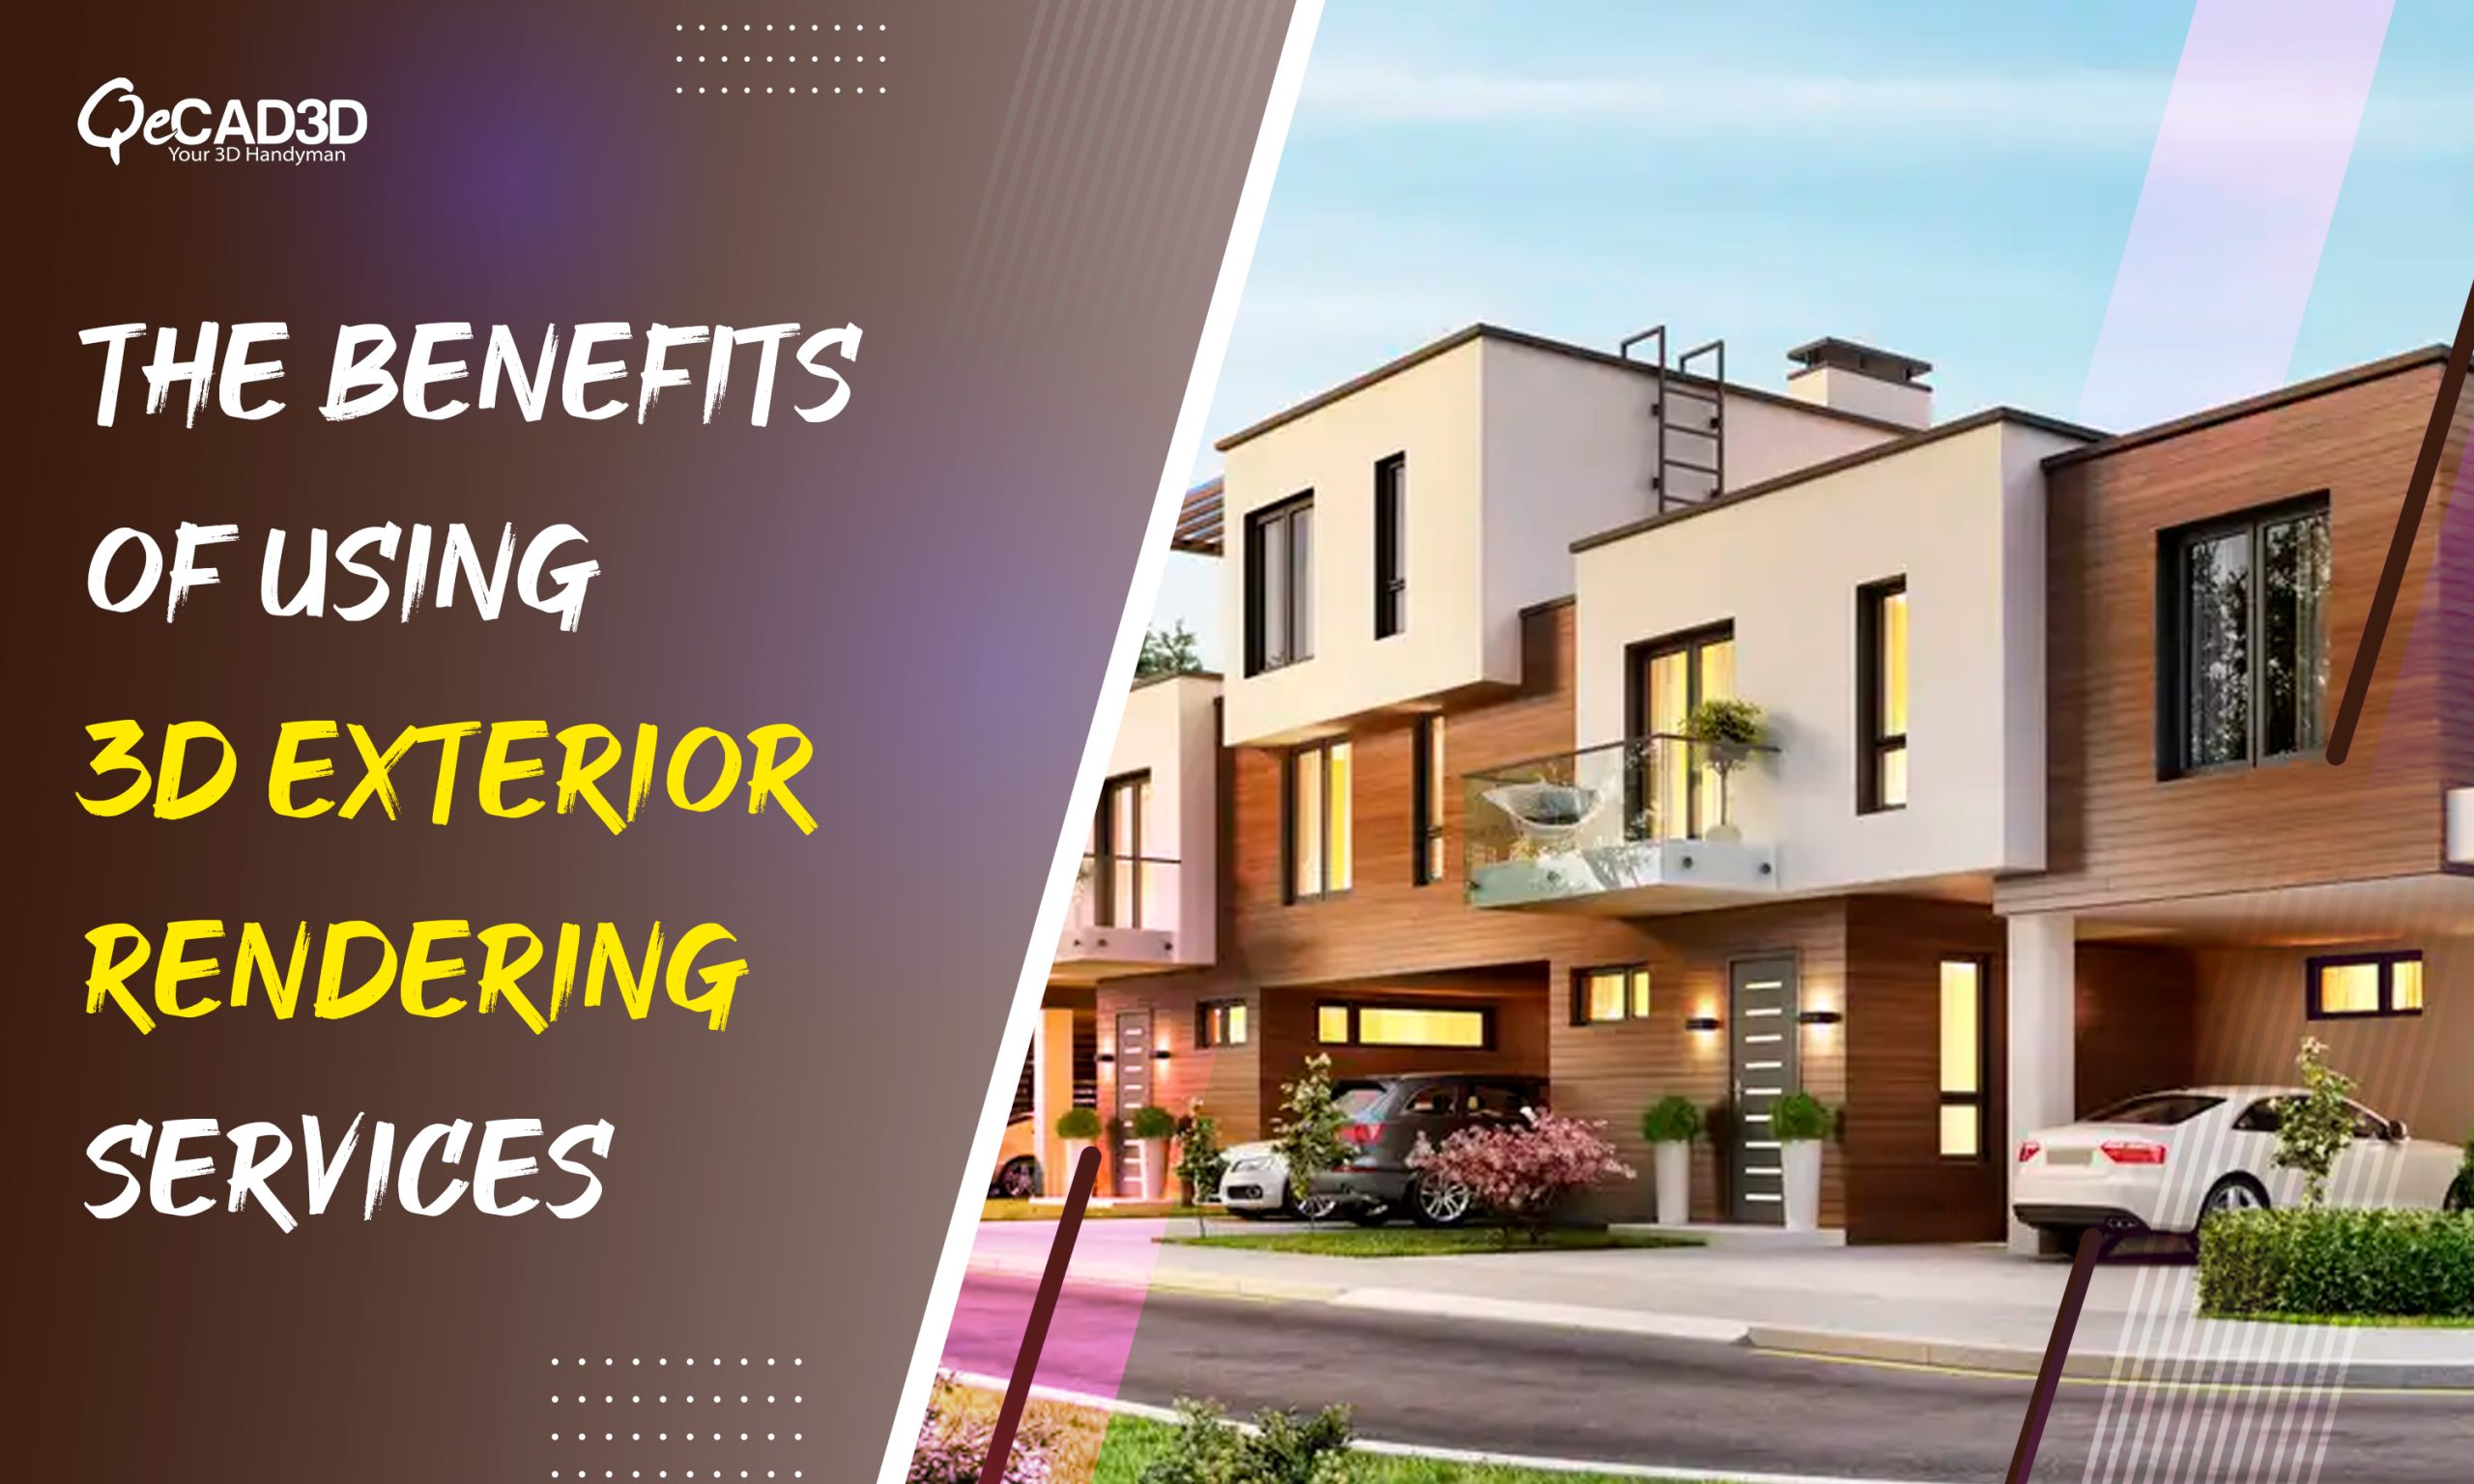 The benefits of using 3D exterior rendering services